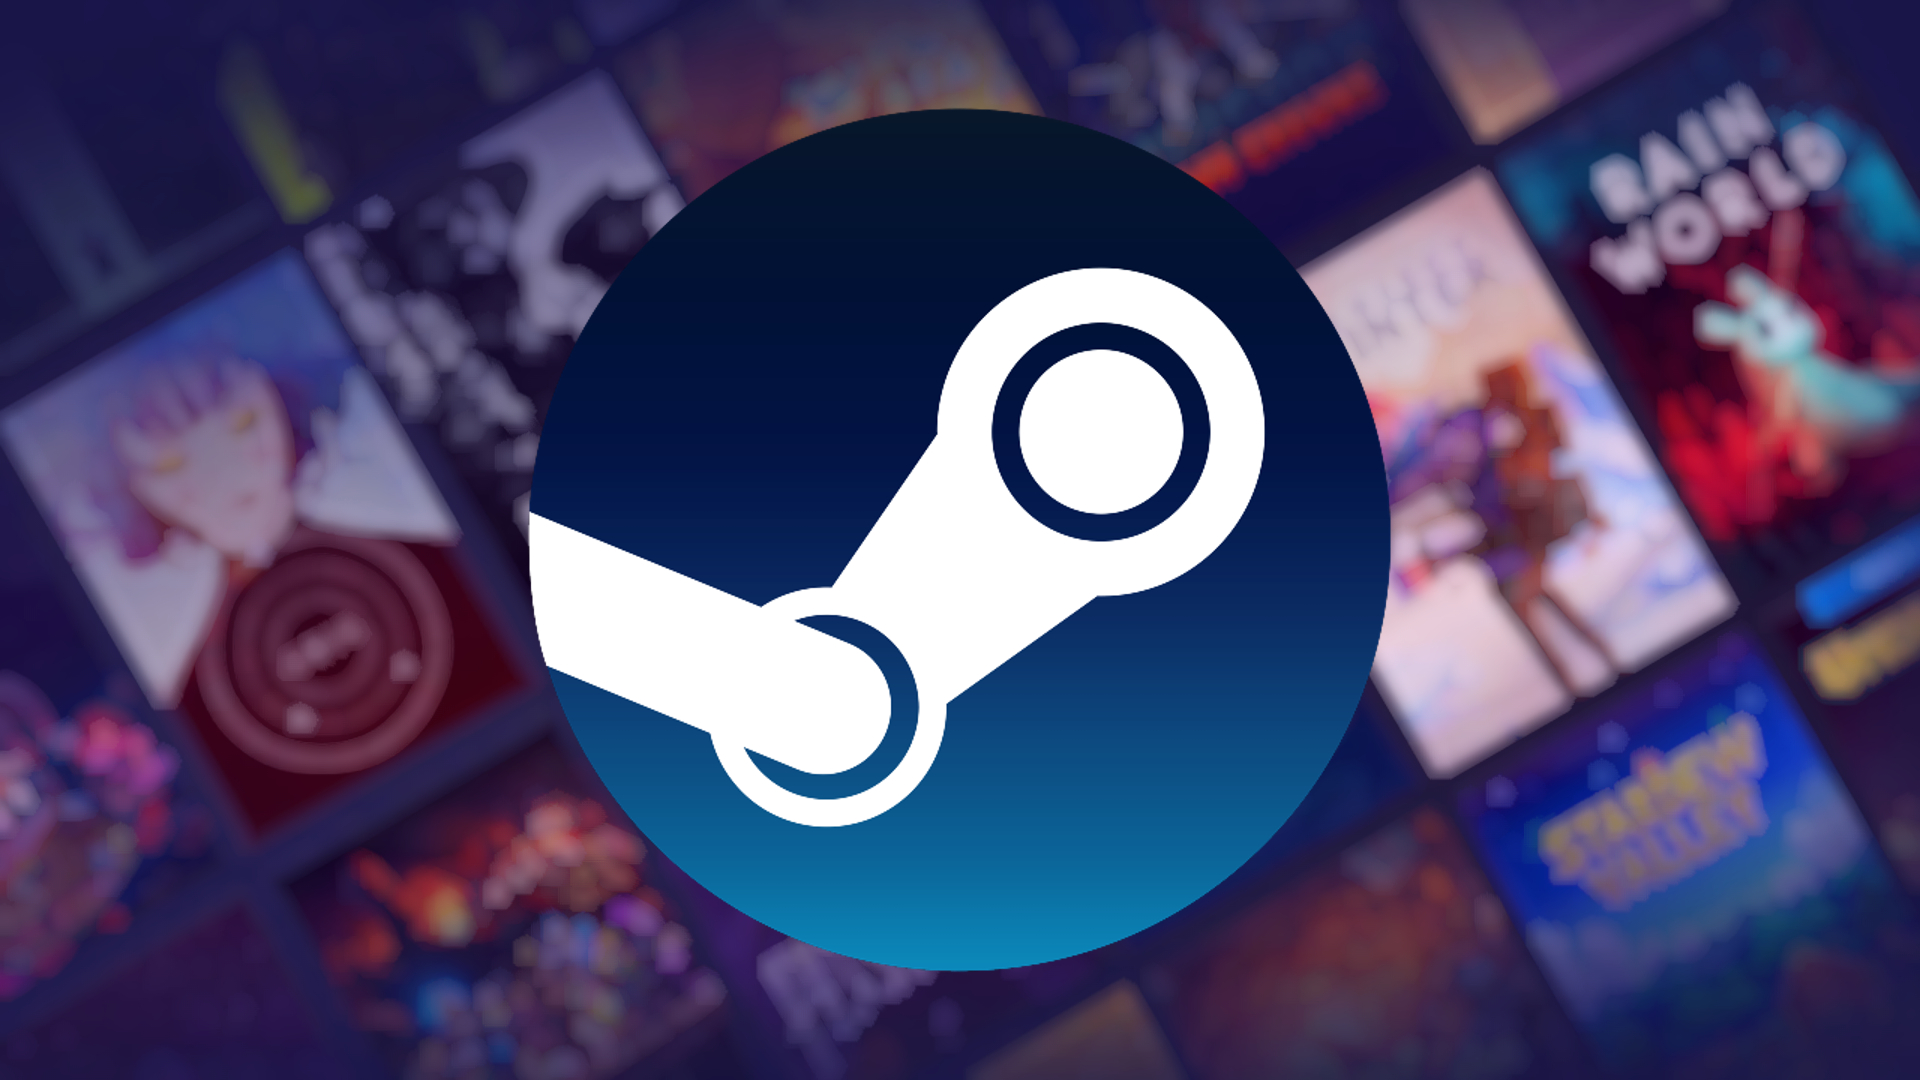 Valve improves the Steam Workshop with its first update in years